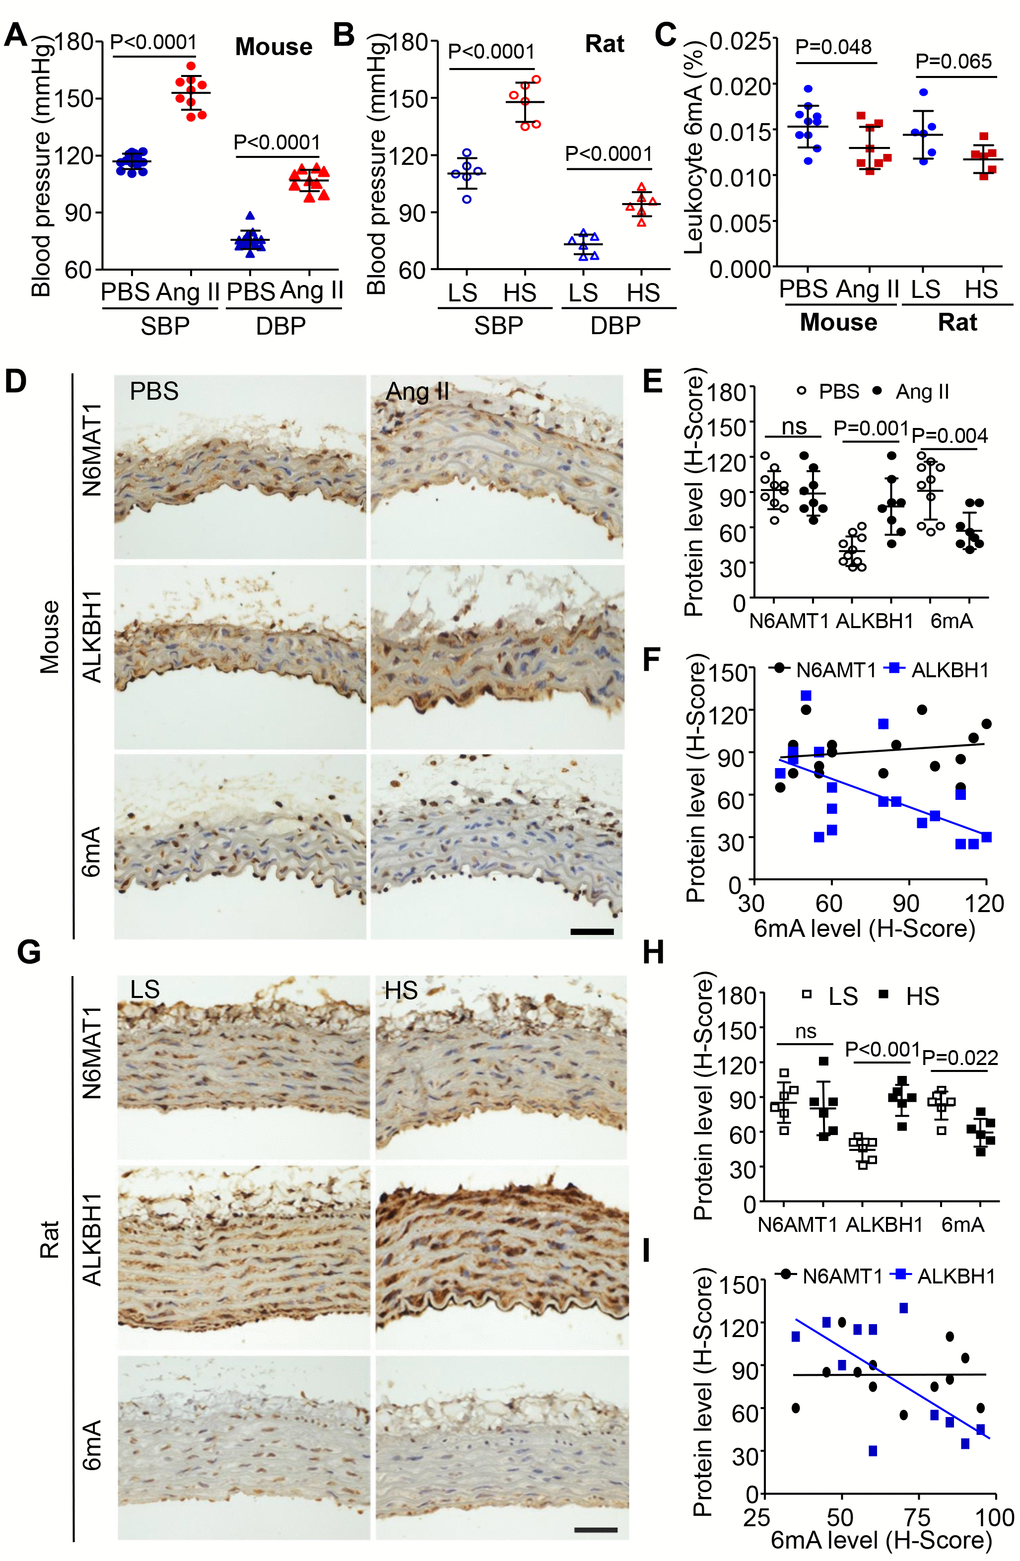 Effect of 6mA DNA level and its modulators in leukocytes and vasculature of mice and rat hypertension models. (A, B) Elevated SBP and diastolic blood pressure (DBP) in angiotensin II (Ang II)-infused C57BL6 wild-type mice (A) and Dahl salt-sensitive rats treated with high salt (HS, 8% NaCl) (B) compared with their controls. (C) Reduced 6mA DNA level in leukocytes of mice and rat hypertension models. (D, E) Representative immunohistochemistry (IHC) and quantification of ALKBH1, N6AMT1 and 6mA levels in vascular smooth muscle cells (VSMCs) of mouse thoracic aorta with sterile saline (Ctrl) or Ang II infusion. Scale bar: 50 μm. (F) Spearman correlation coefficient for m6A level correlated with ALKBH1 or N6AMT1 protein levels in VSMCs of mouse thoracic aorta. (G, H) Representative IHC and quantification of ALKBH1, N6AMT1 and 6mA levels in VSMCs of rat thoracic aortas with low salt (LS; 0.4% NaCl) or HS treatment. Scale bar: 50 μm. (I) Spearman correlation coefficient for m6A level correlated with ALKBH1 or N6AMT1 protein levels in VSMCs of rat thoracic aorta. Data are mean ± SD and were compared by unpaired t test in (A–C, E and H).